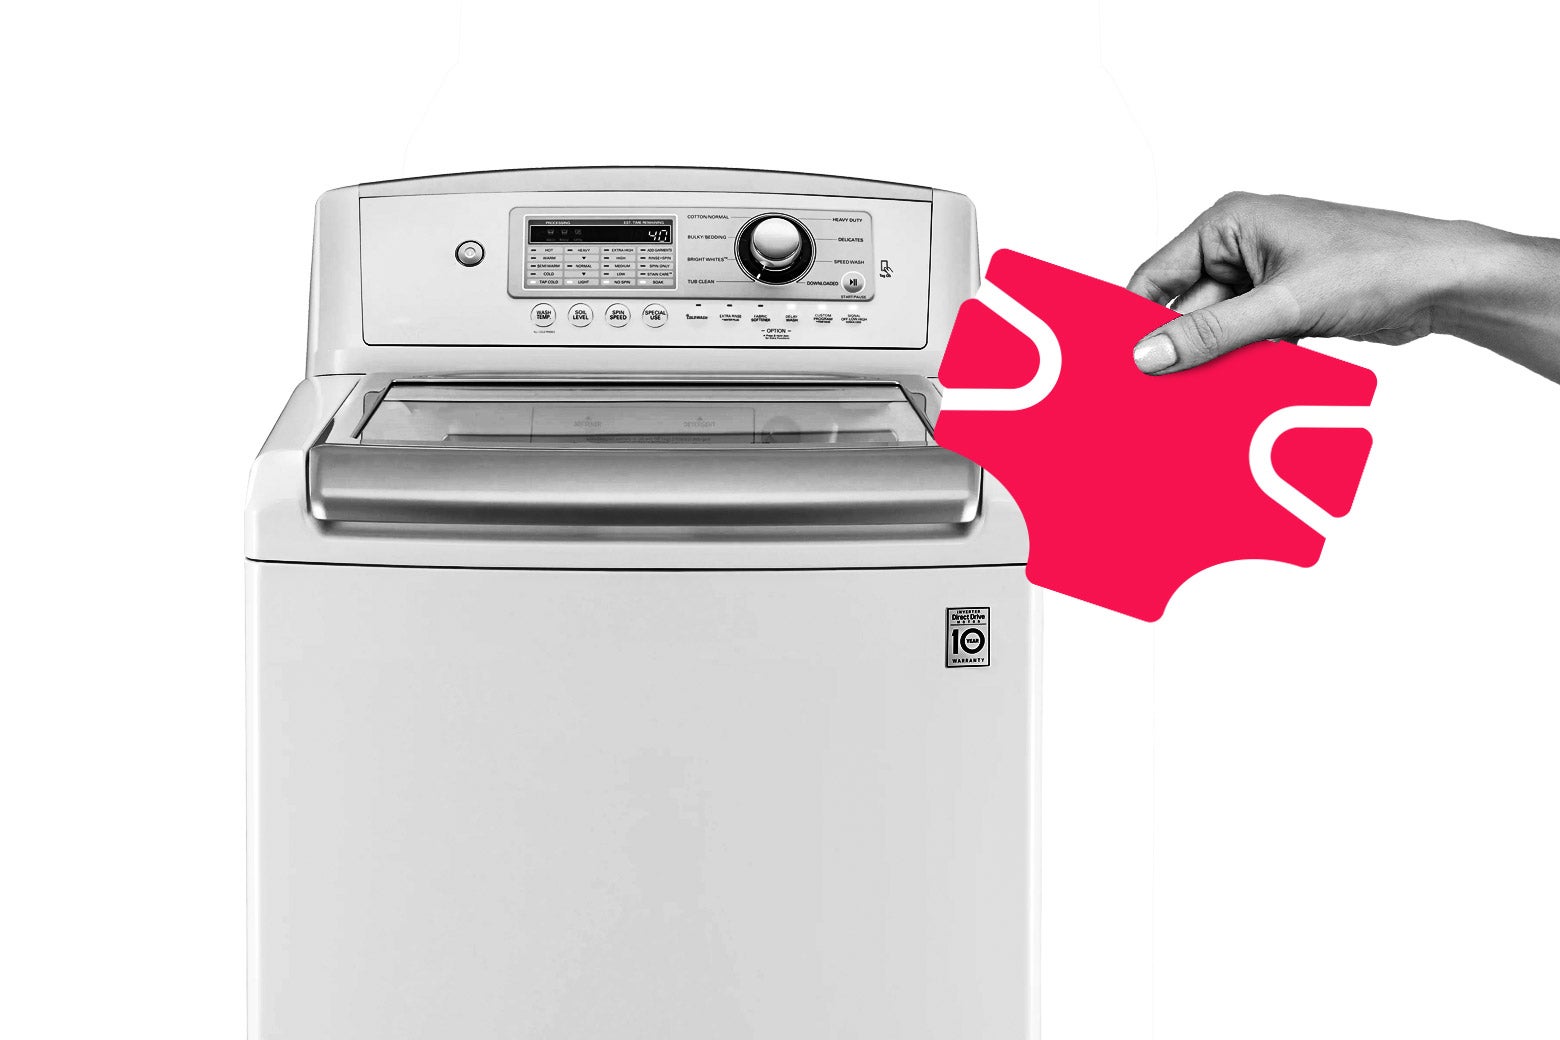 A washer with a hand reaching in with an illustrated diaper.